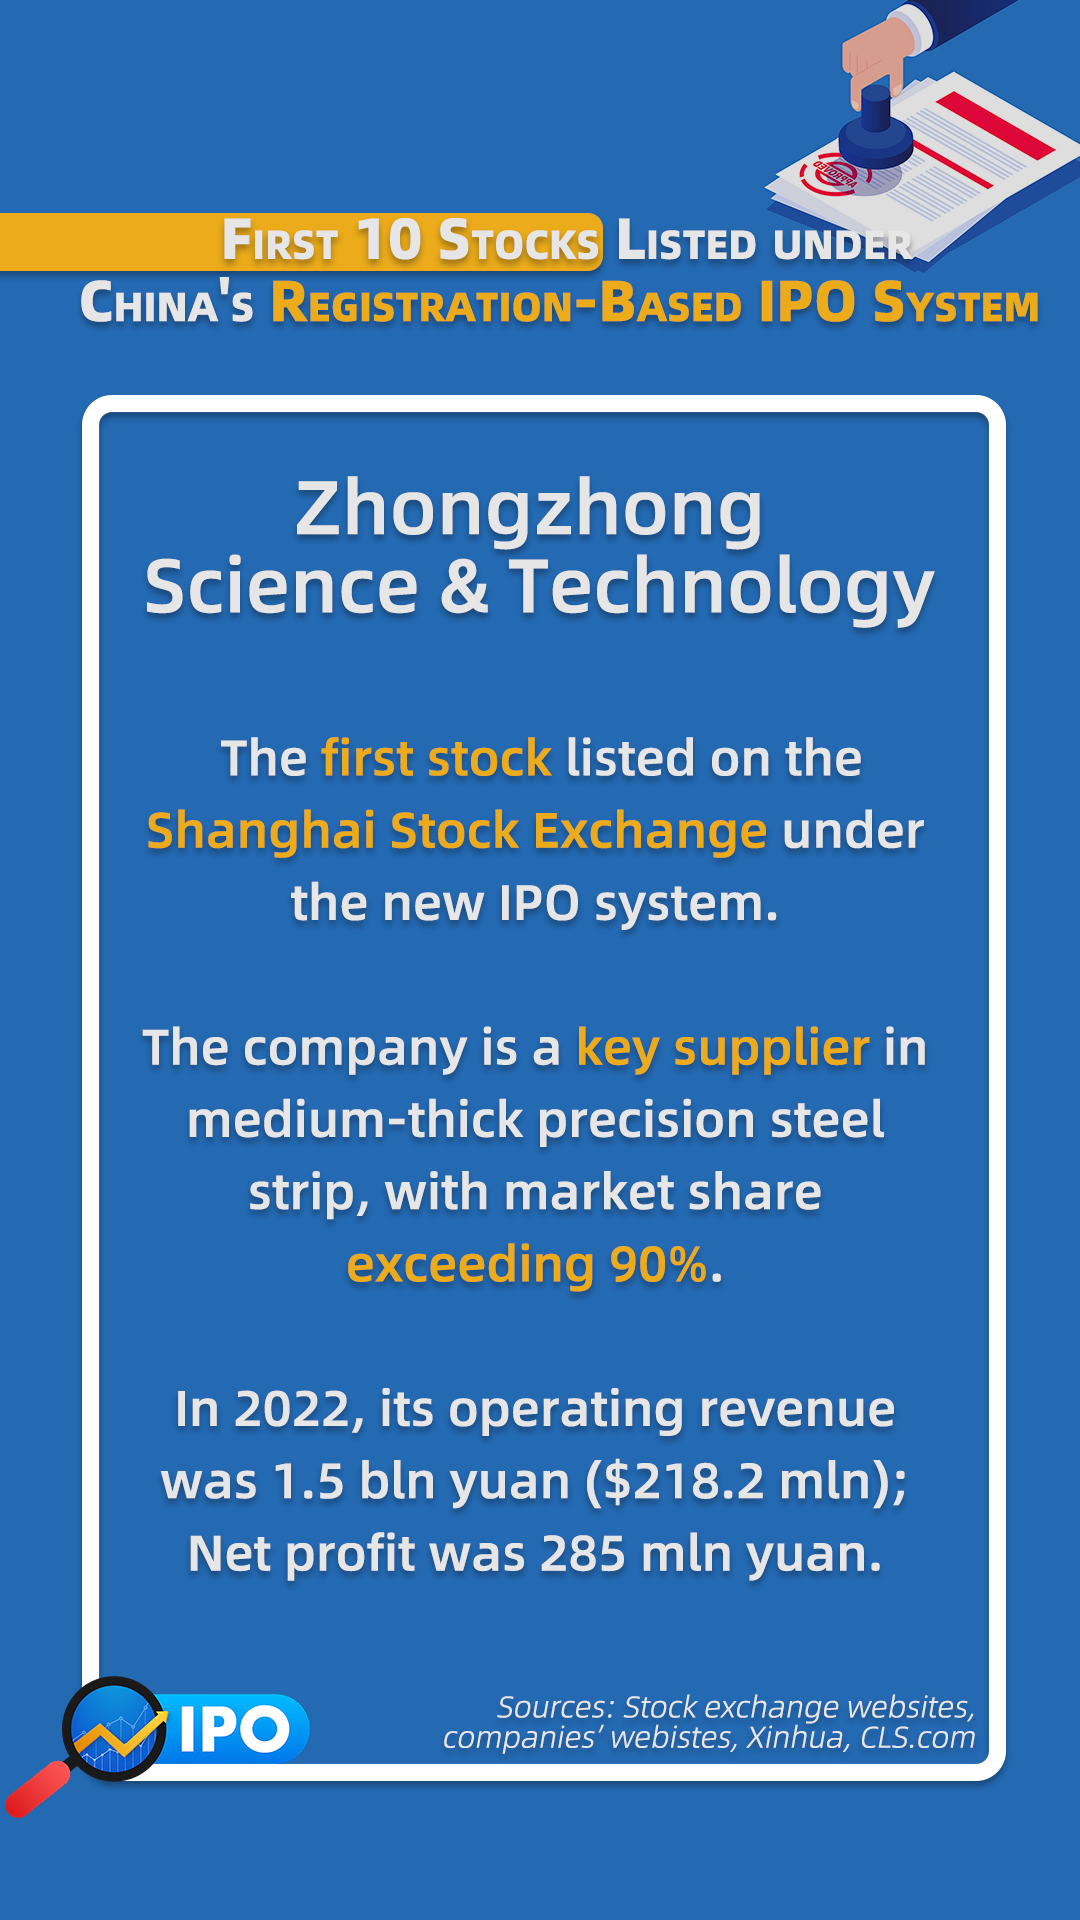 Zhongzhong Science & Technology, one of the 10 listed companies